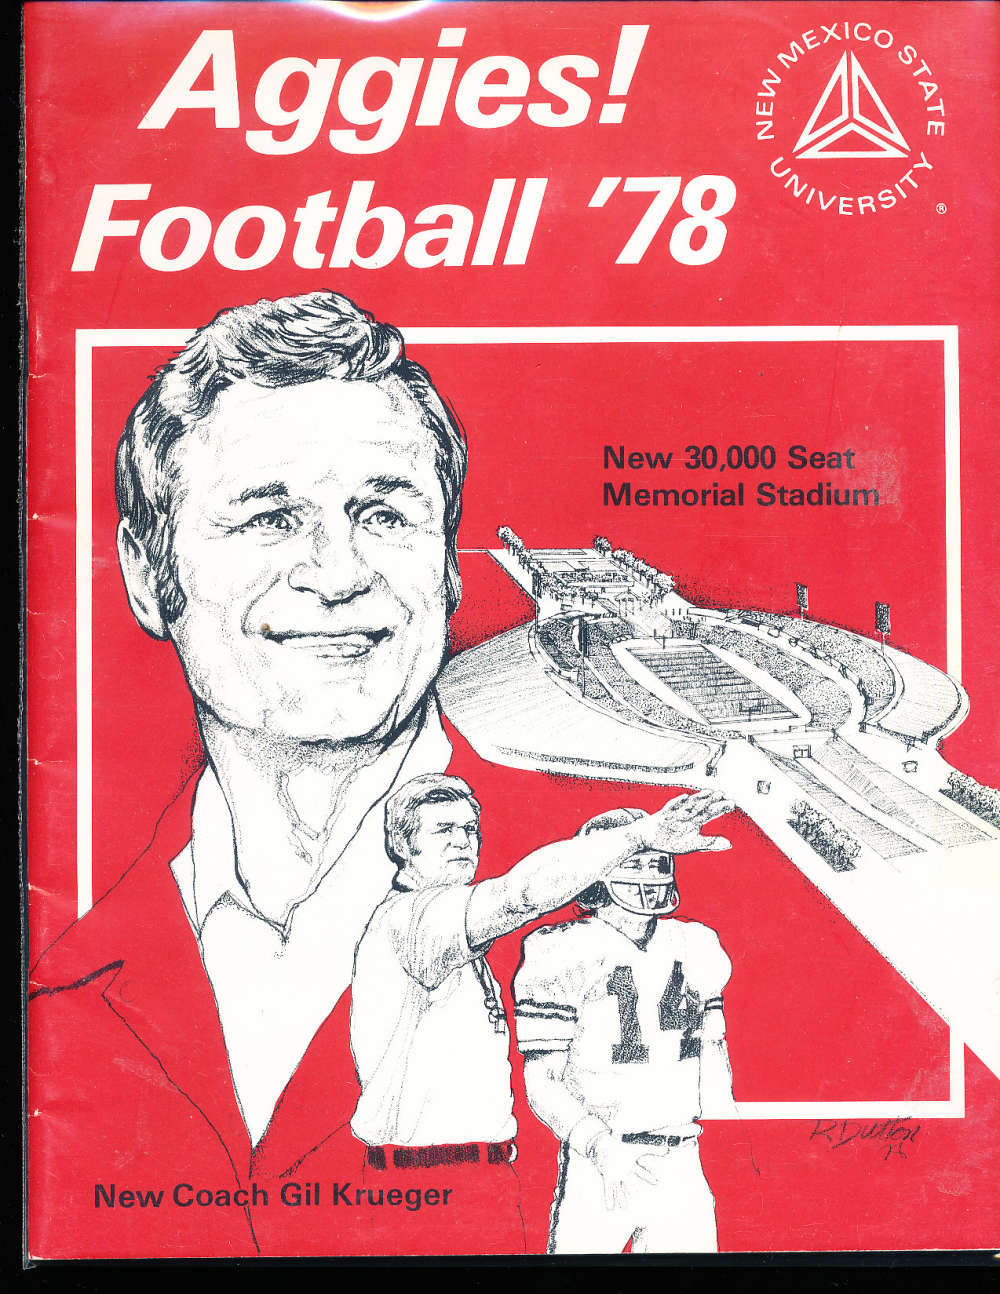 1978 New Mexico  State Football Guide a6 bx66